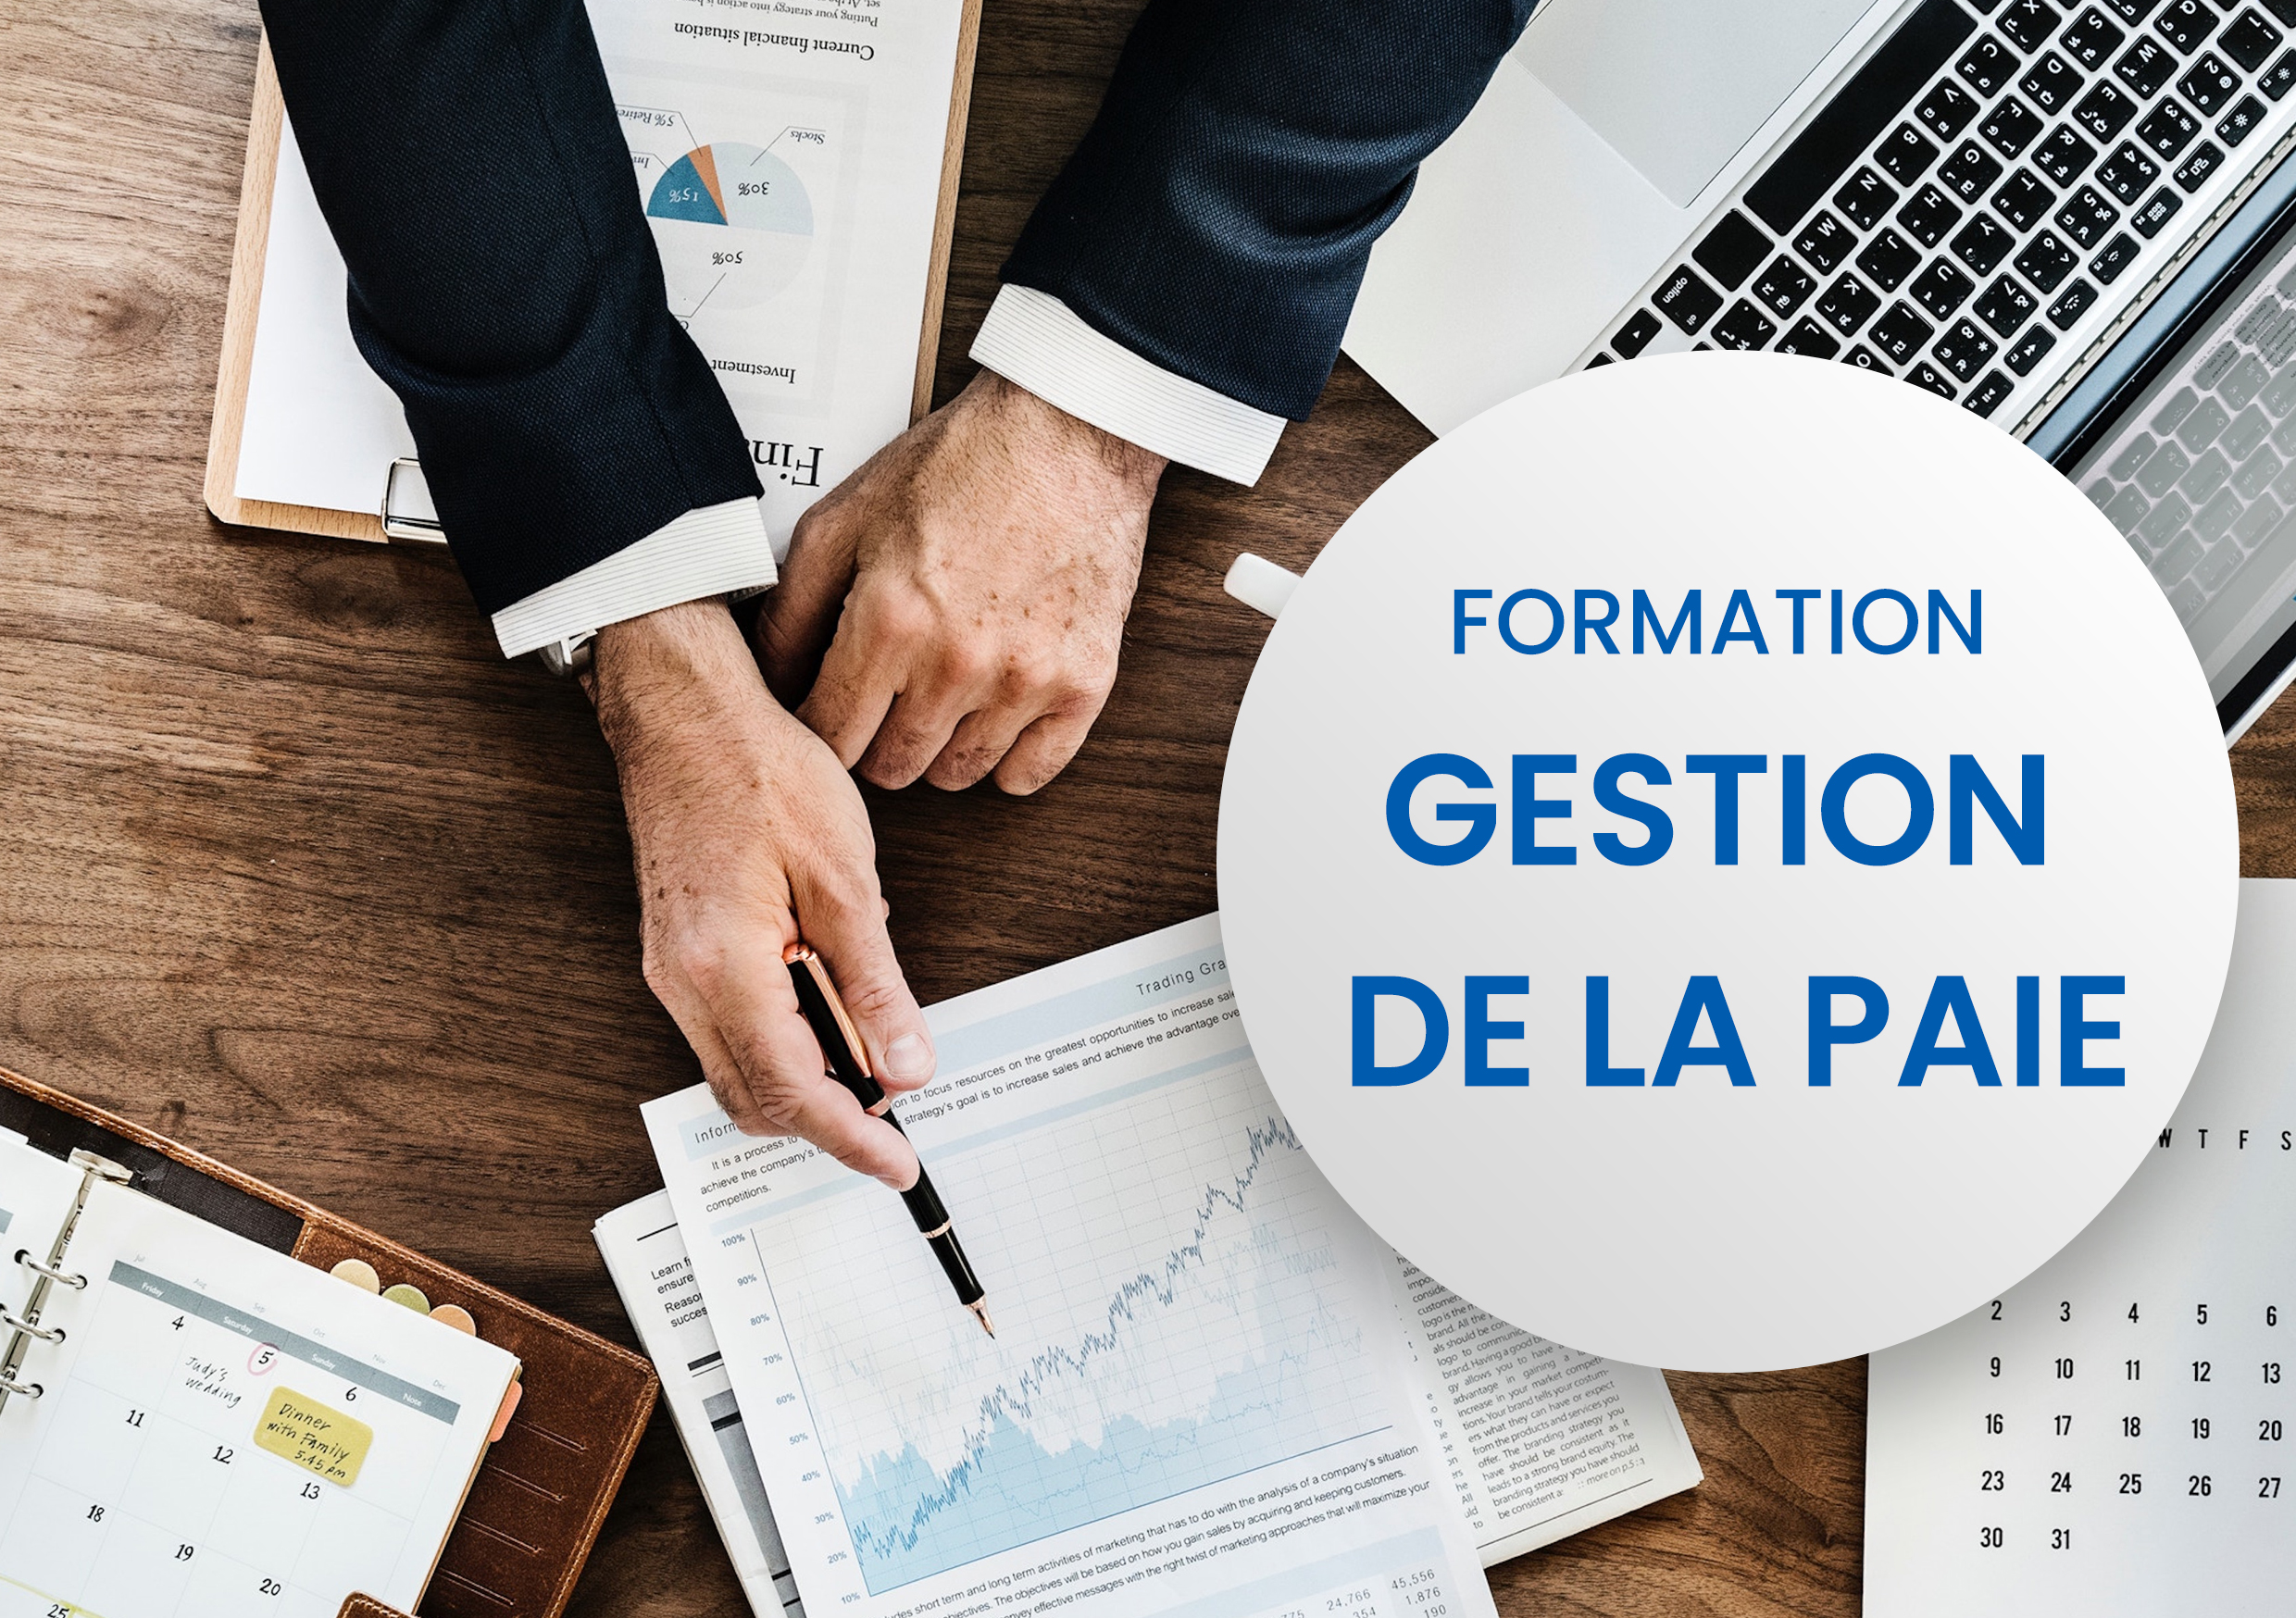 Nos formations